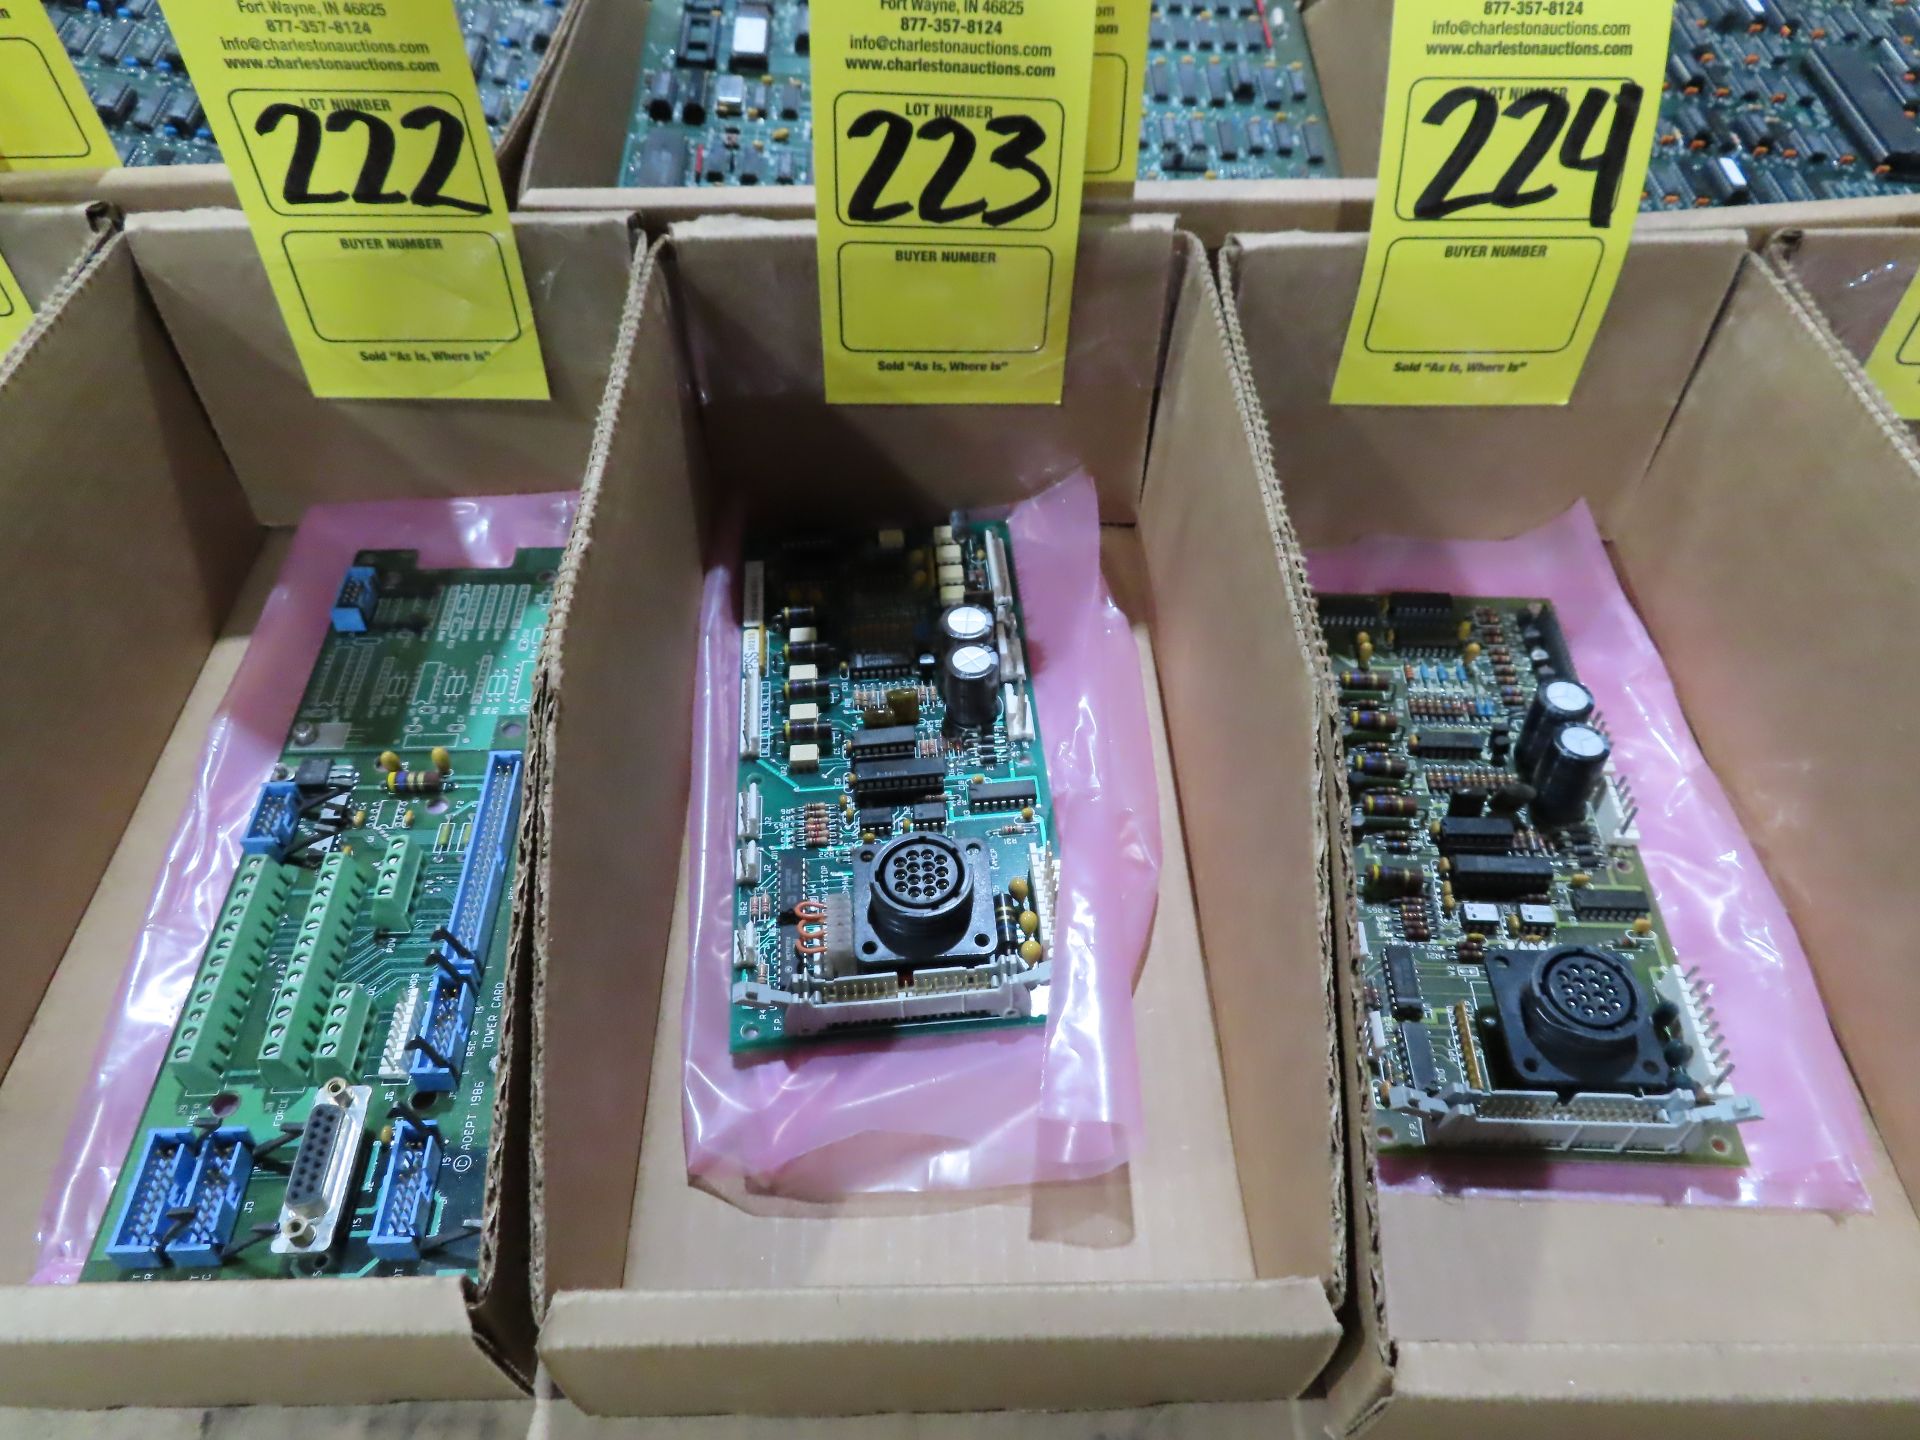 Adept 10310-54040 rev E I/O card, as always, with Brolyn LLC auctions, all lots can be picked up